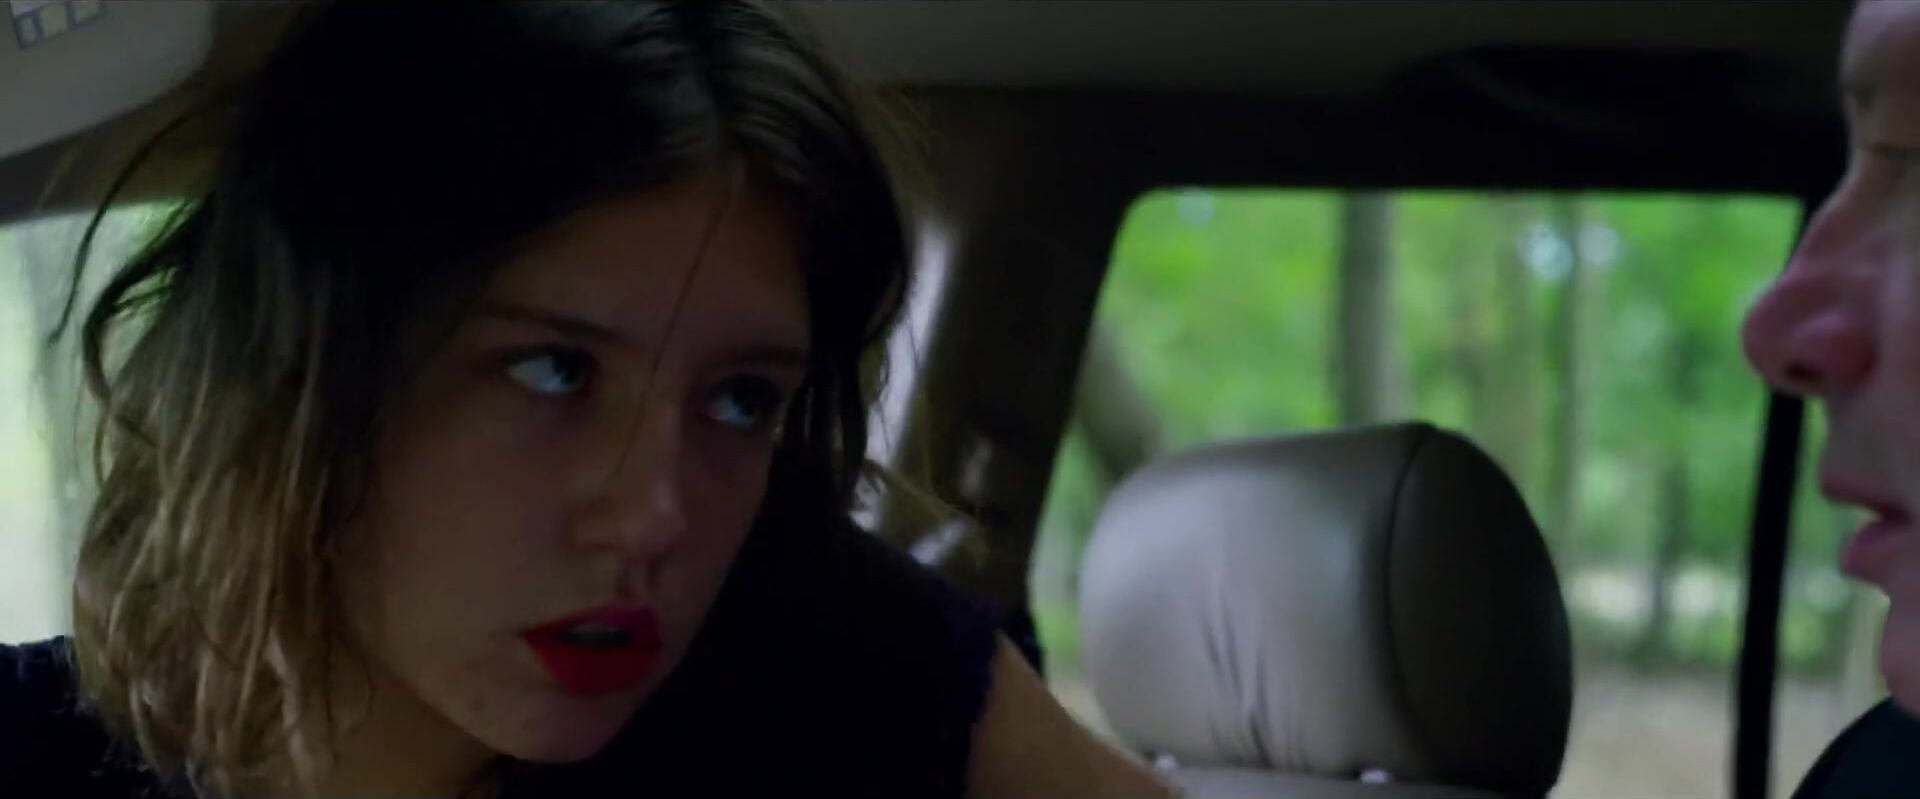 Masturbacion Adele Exarchopoulos and other French girls naked fool around in Orpheline (2016) Buttfucking - 1